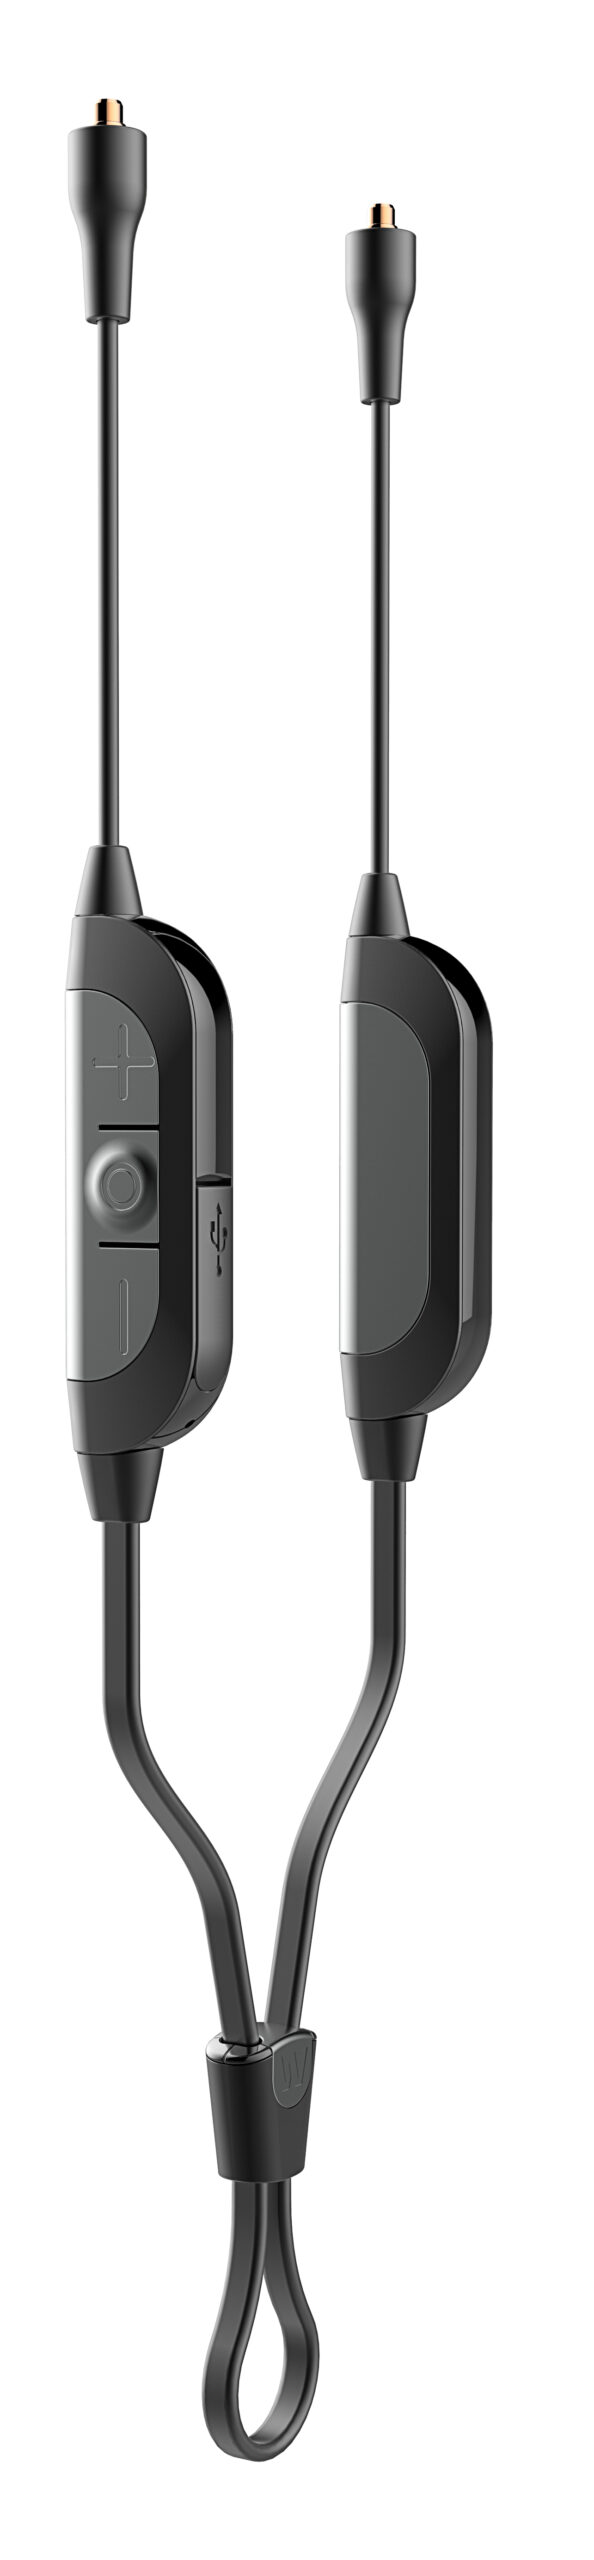 Westone Audio Bluetooth Cable. Featuring sleek black design, highlighted ends, and intuitive controls